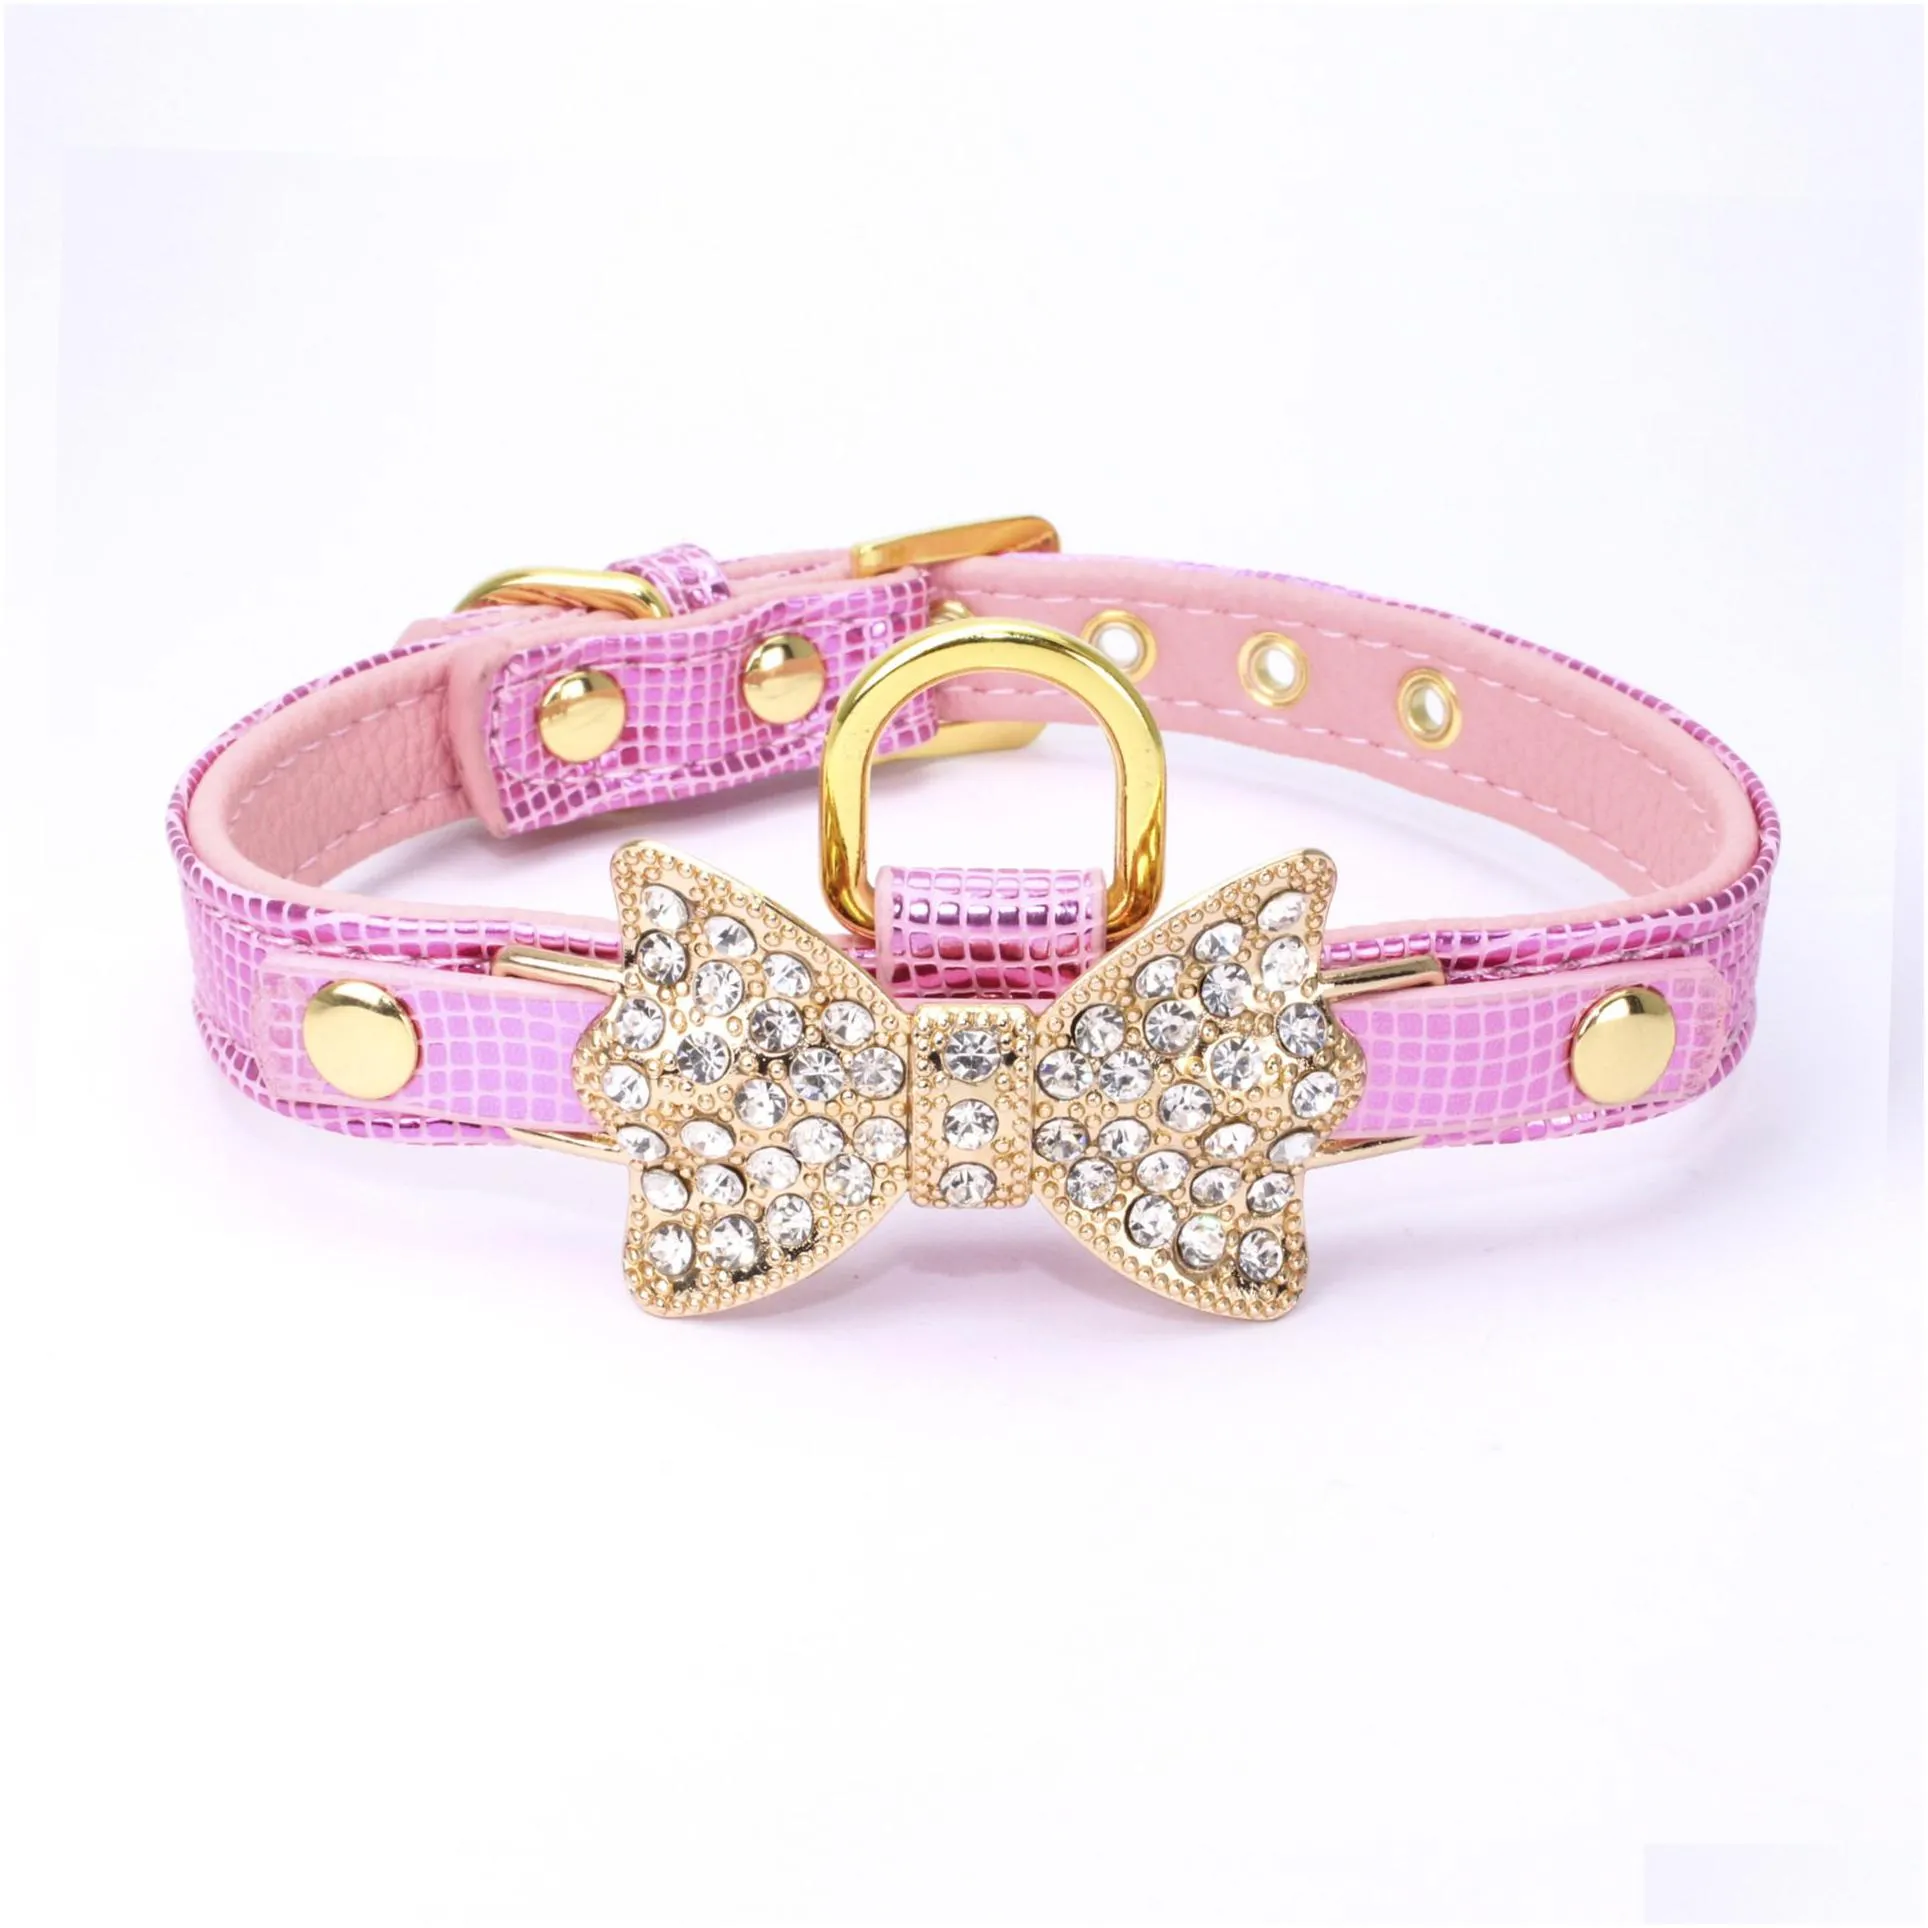 cute designer dog leather trendy pet collars plus matching collar leash harness set comb puppy harness ps1713*11